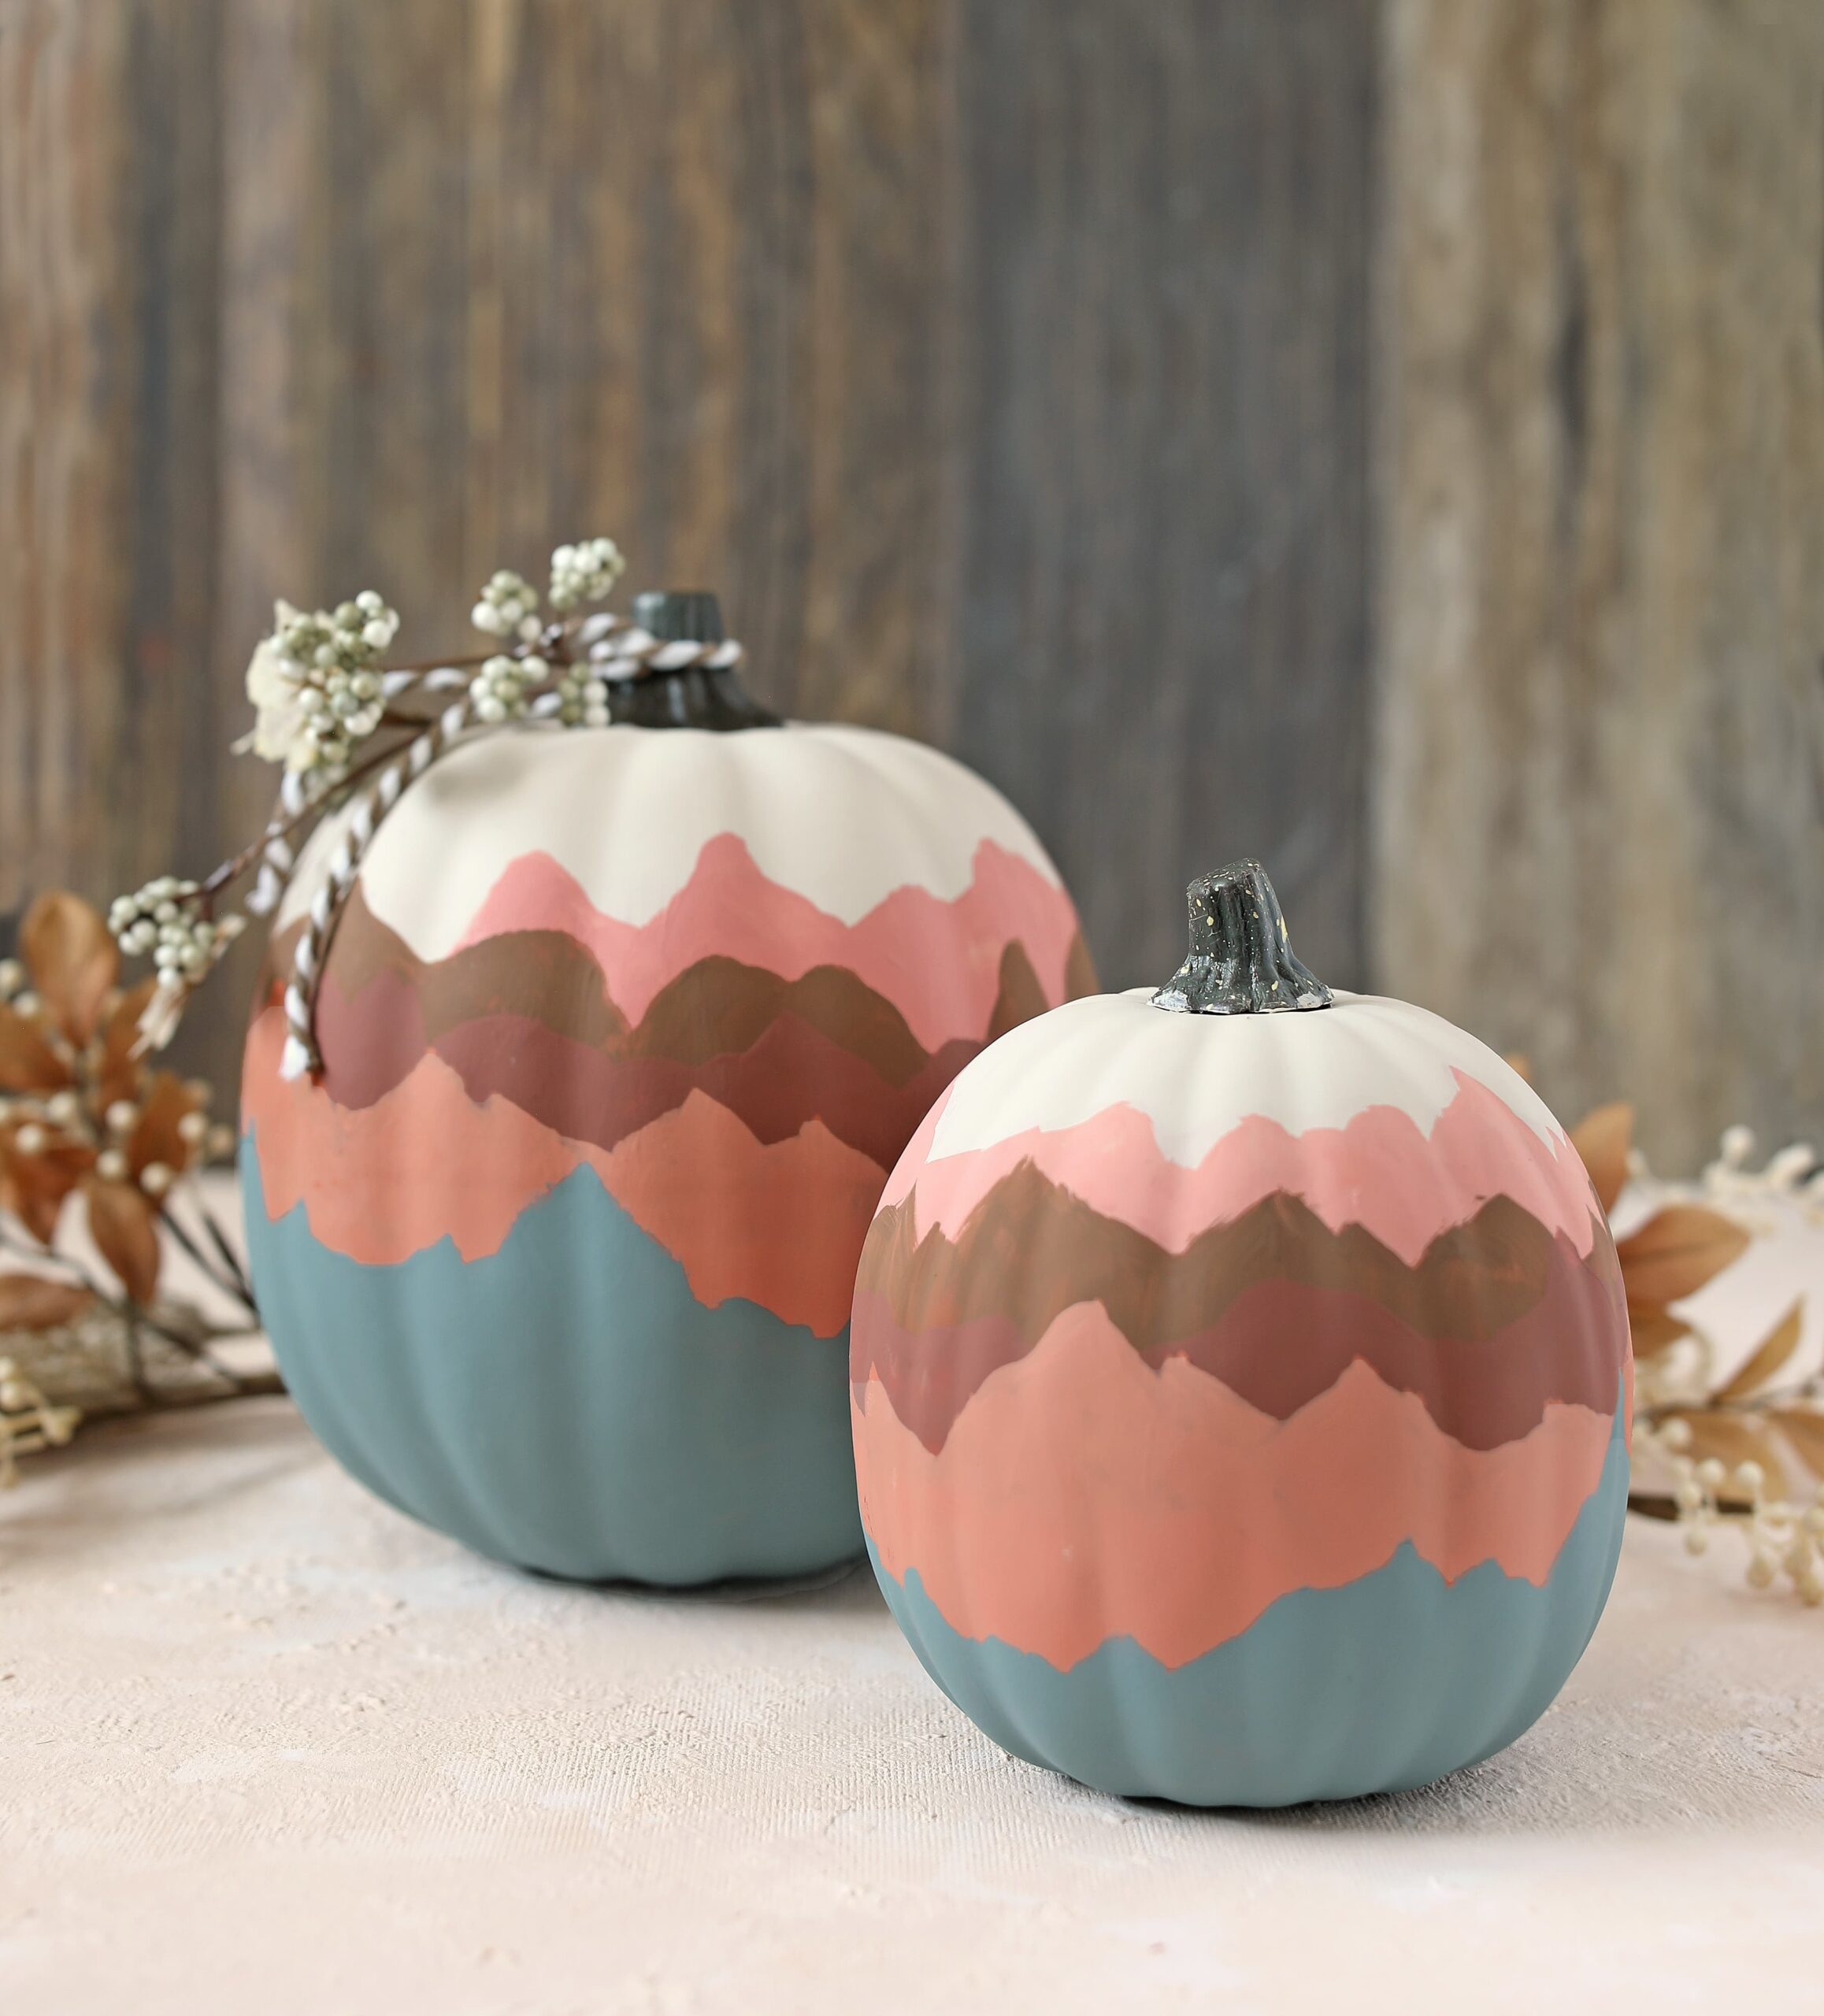 mountains painted on pumpkins